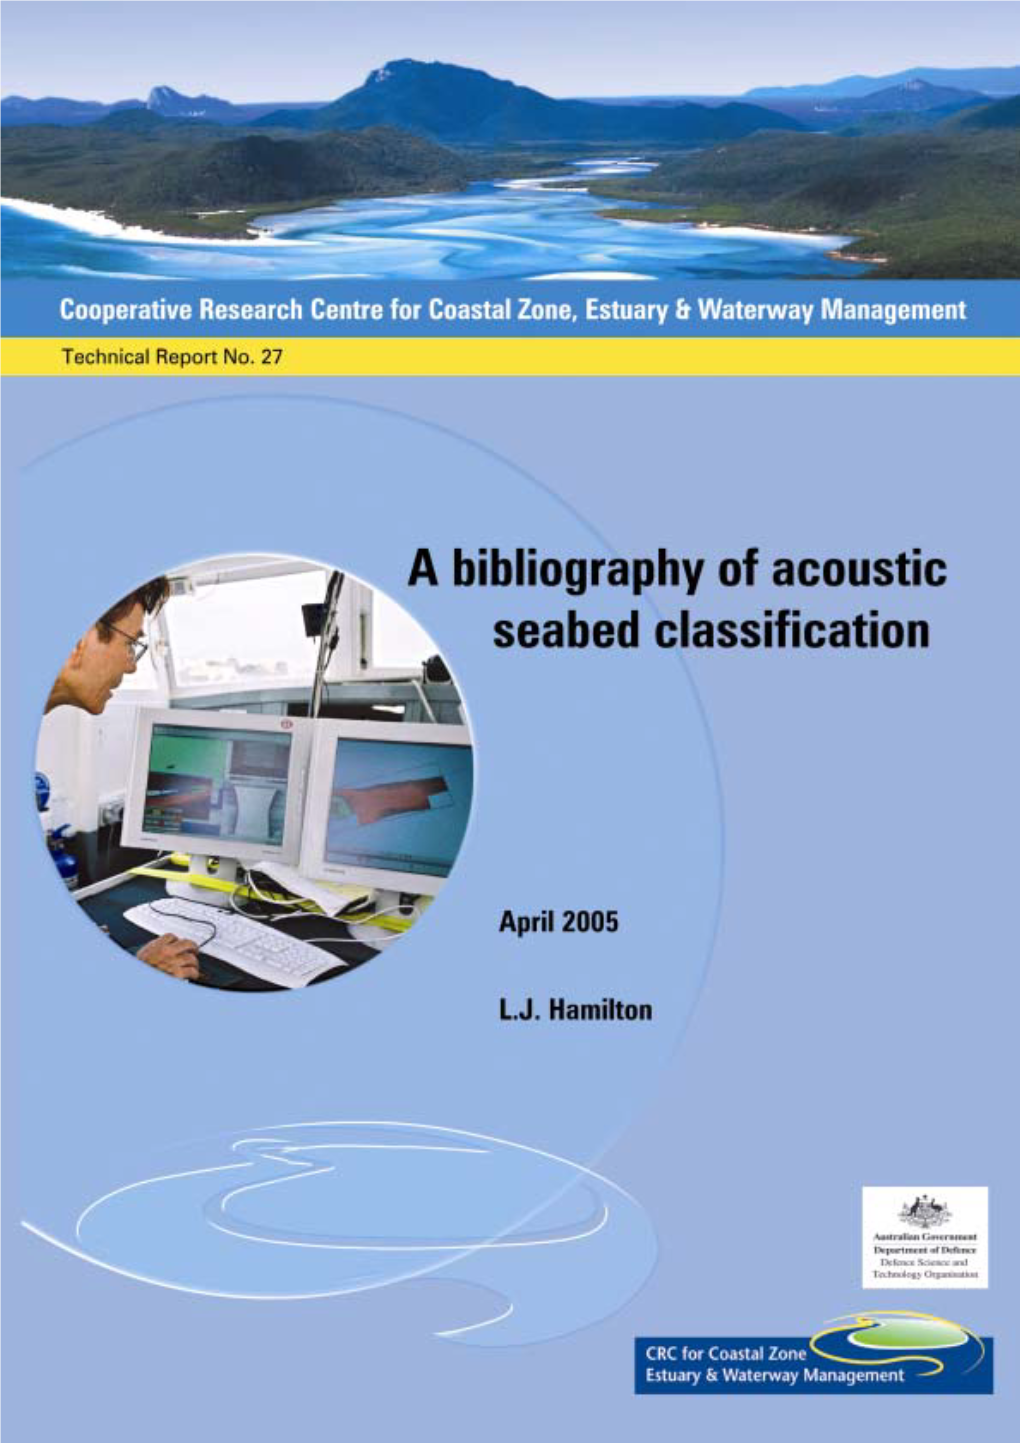 Bibliography of Acoustic Seabed Classification